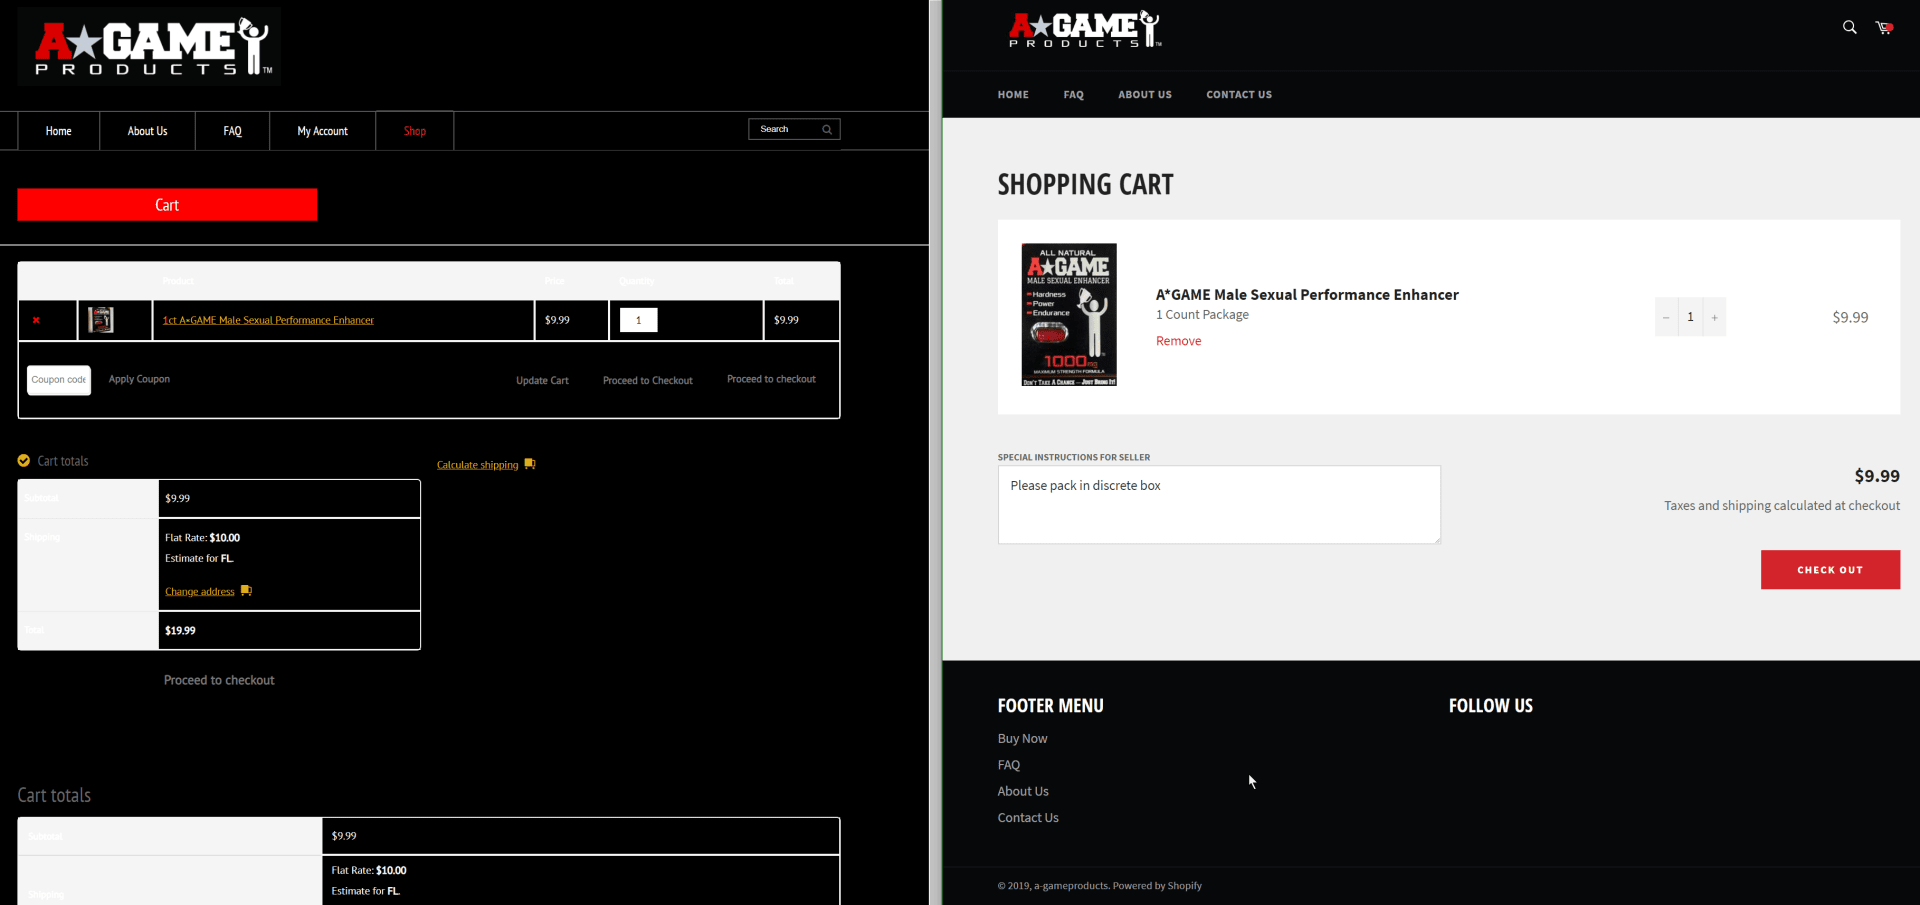 The cart page has a much cleaner feel